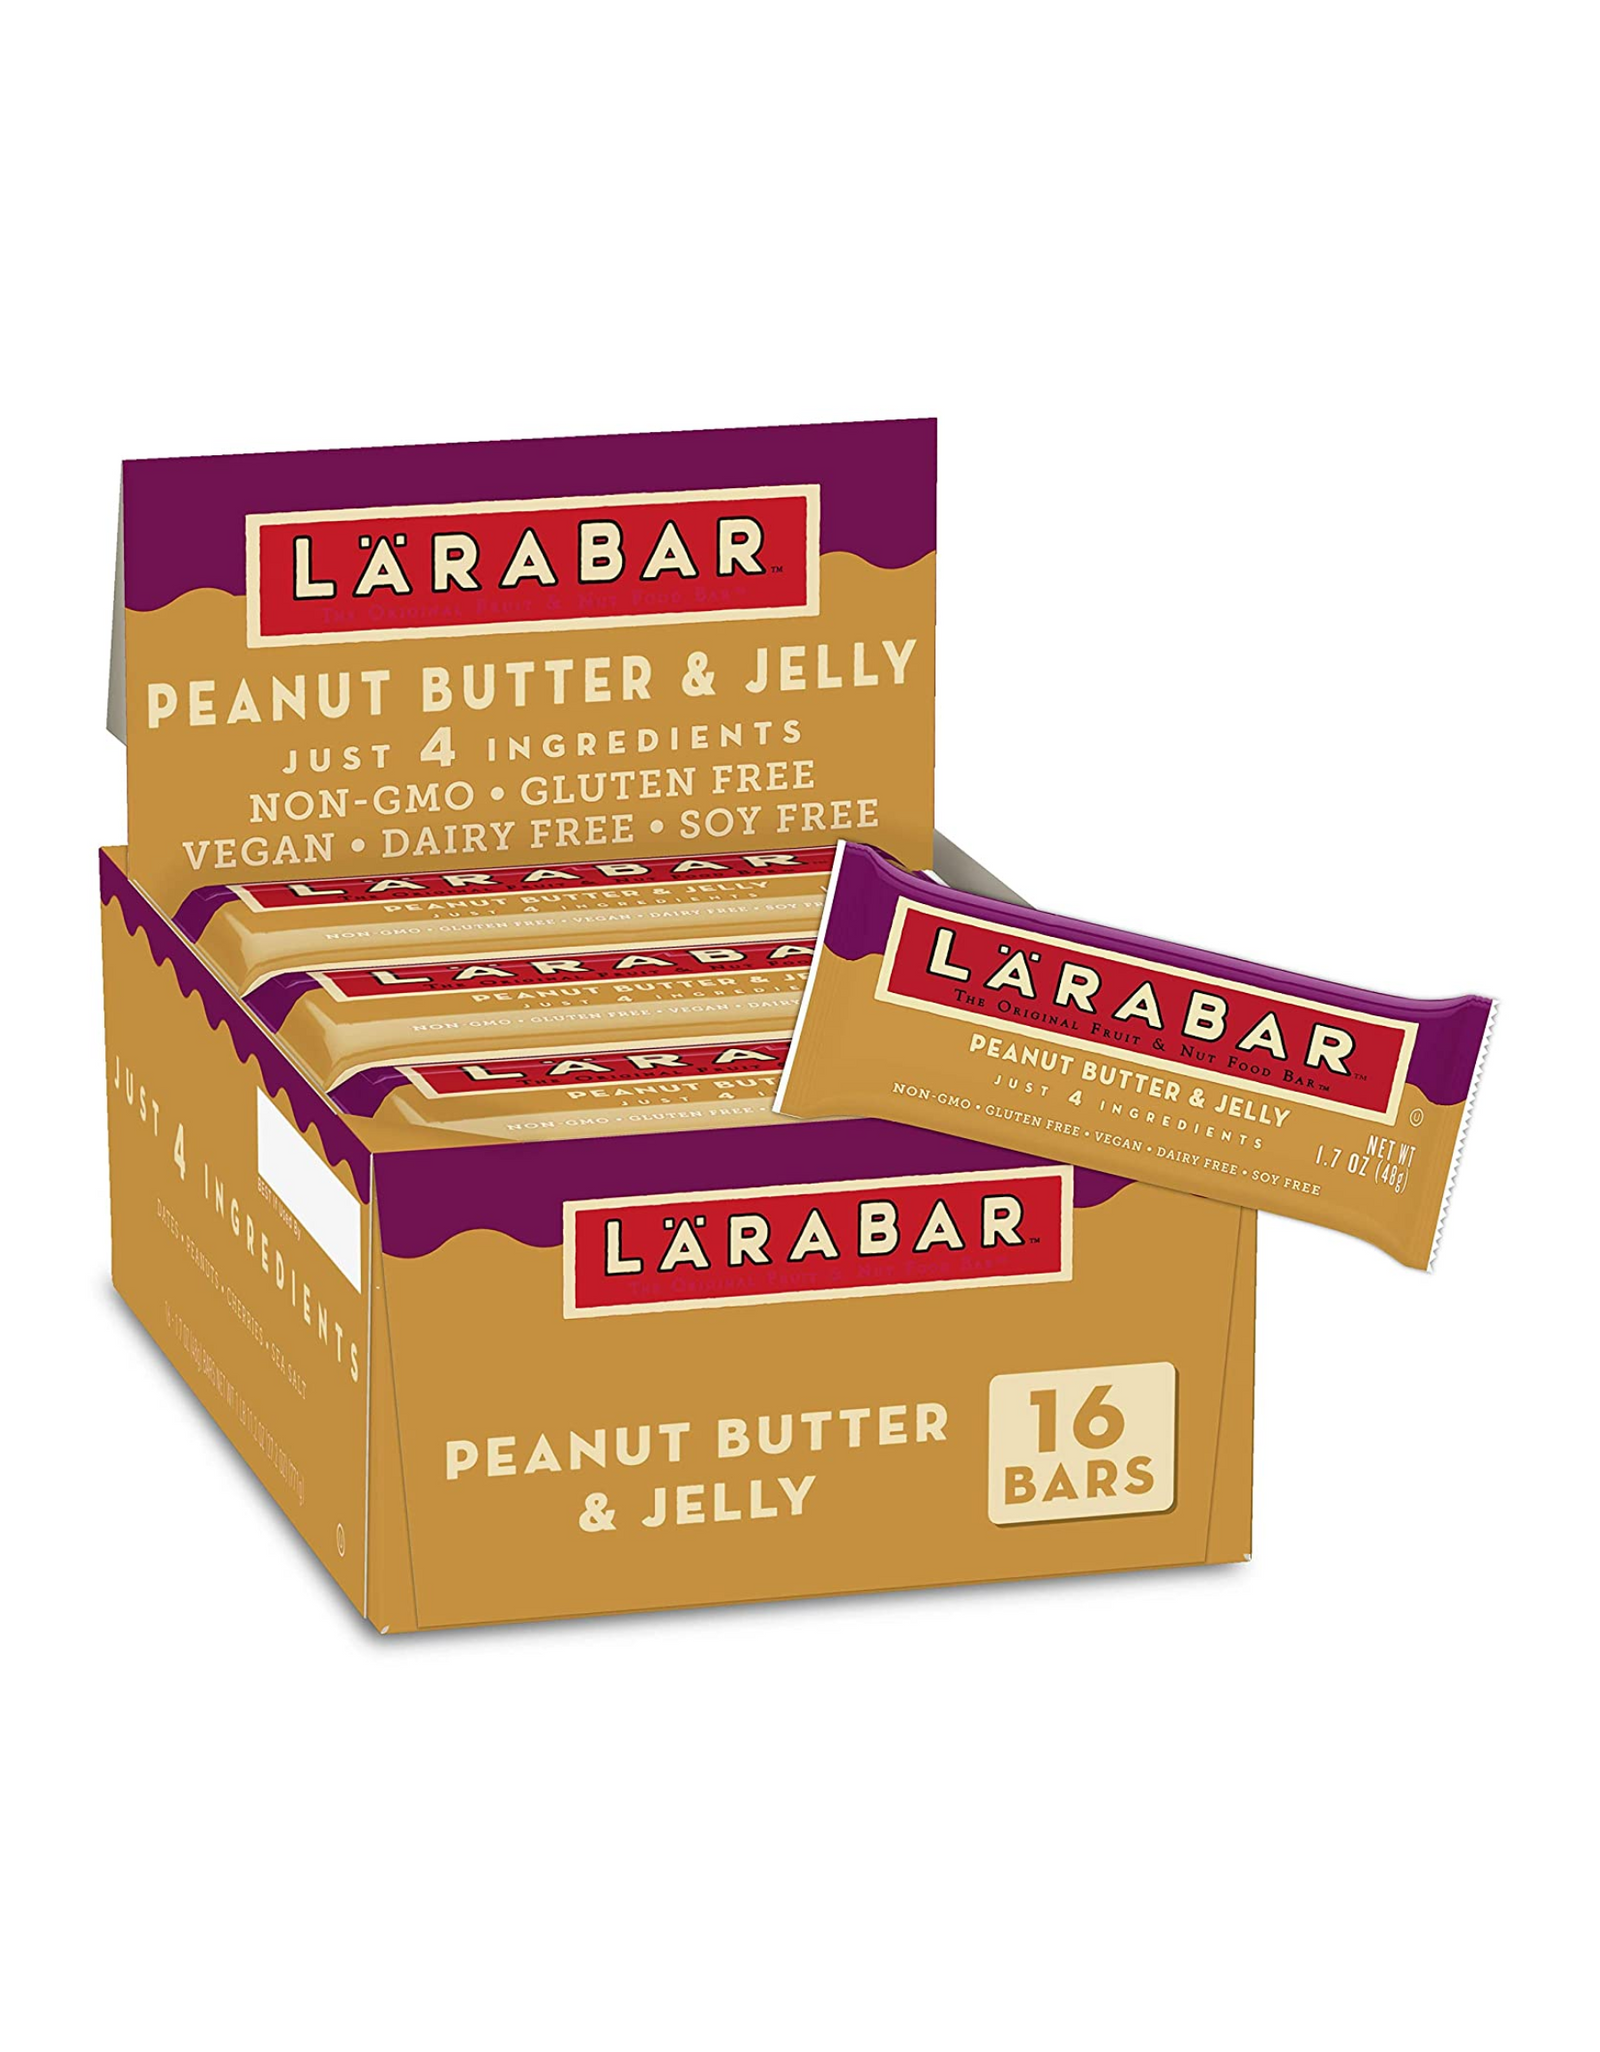 Larabar Peanut Butter and Jelly, Original Real Fruit and Nut Bar, 1.7 oz, 16 Count